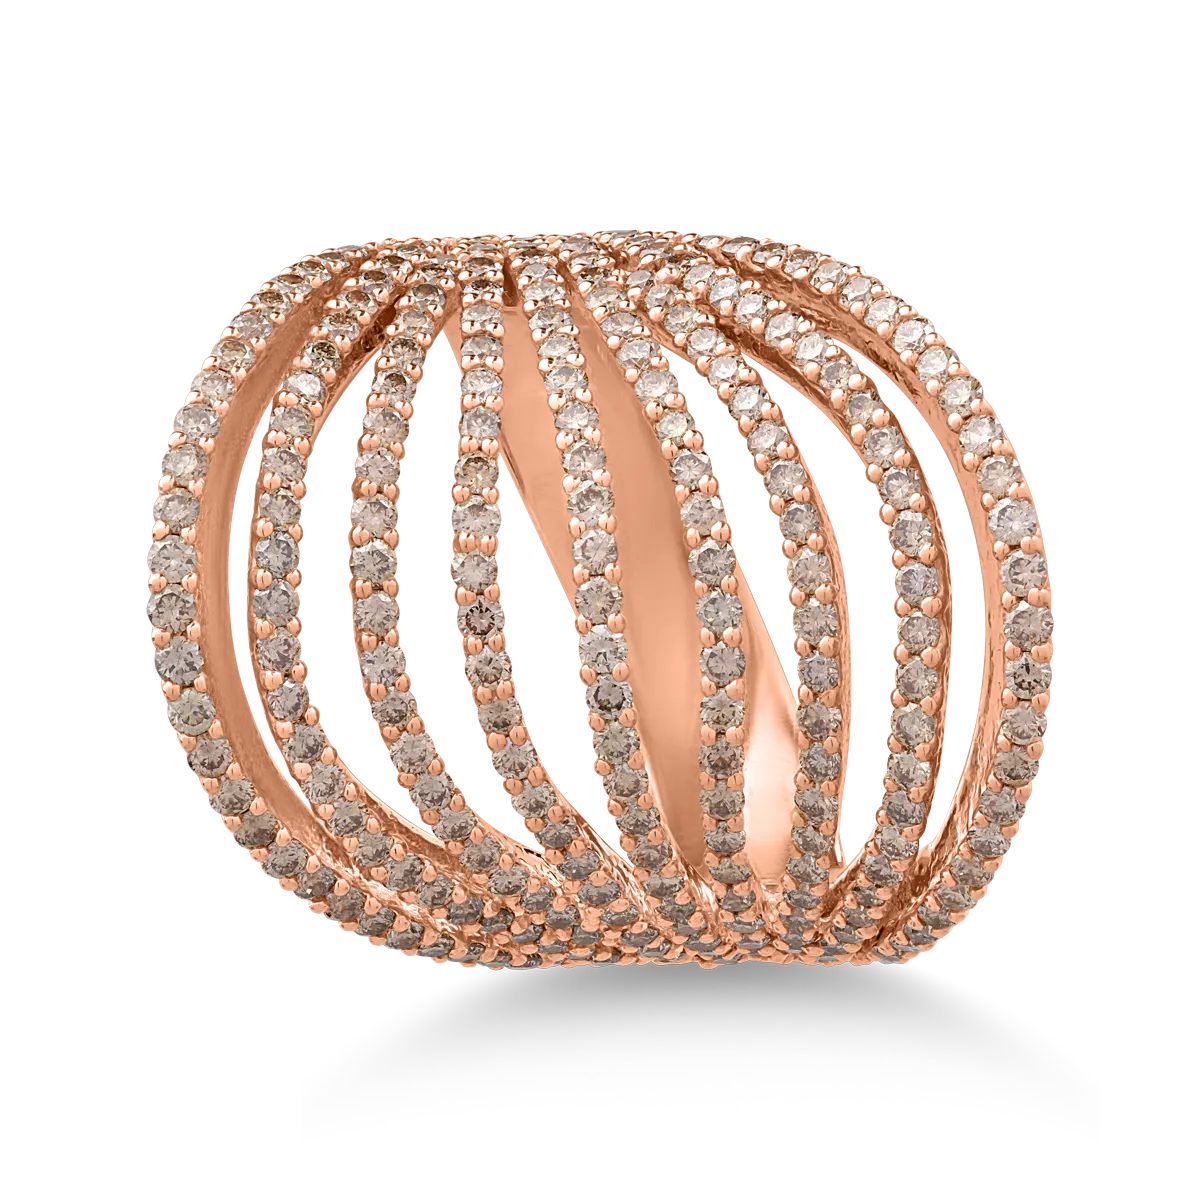 18K rose gold ring with 2.18ct brown diamonds